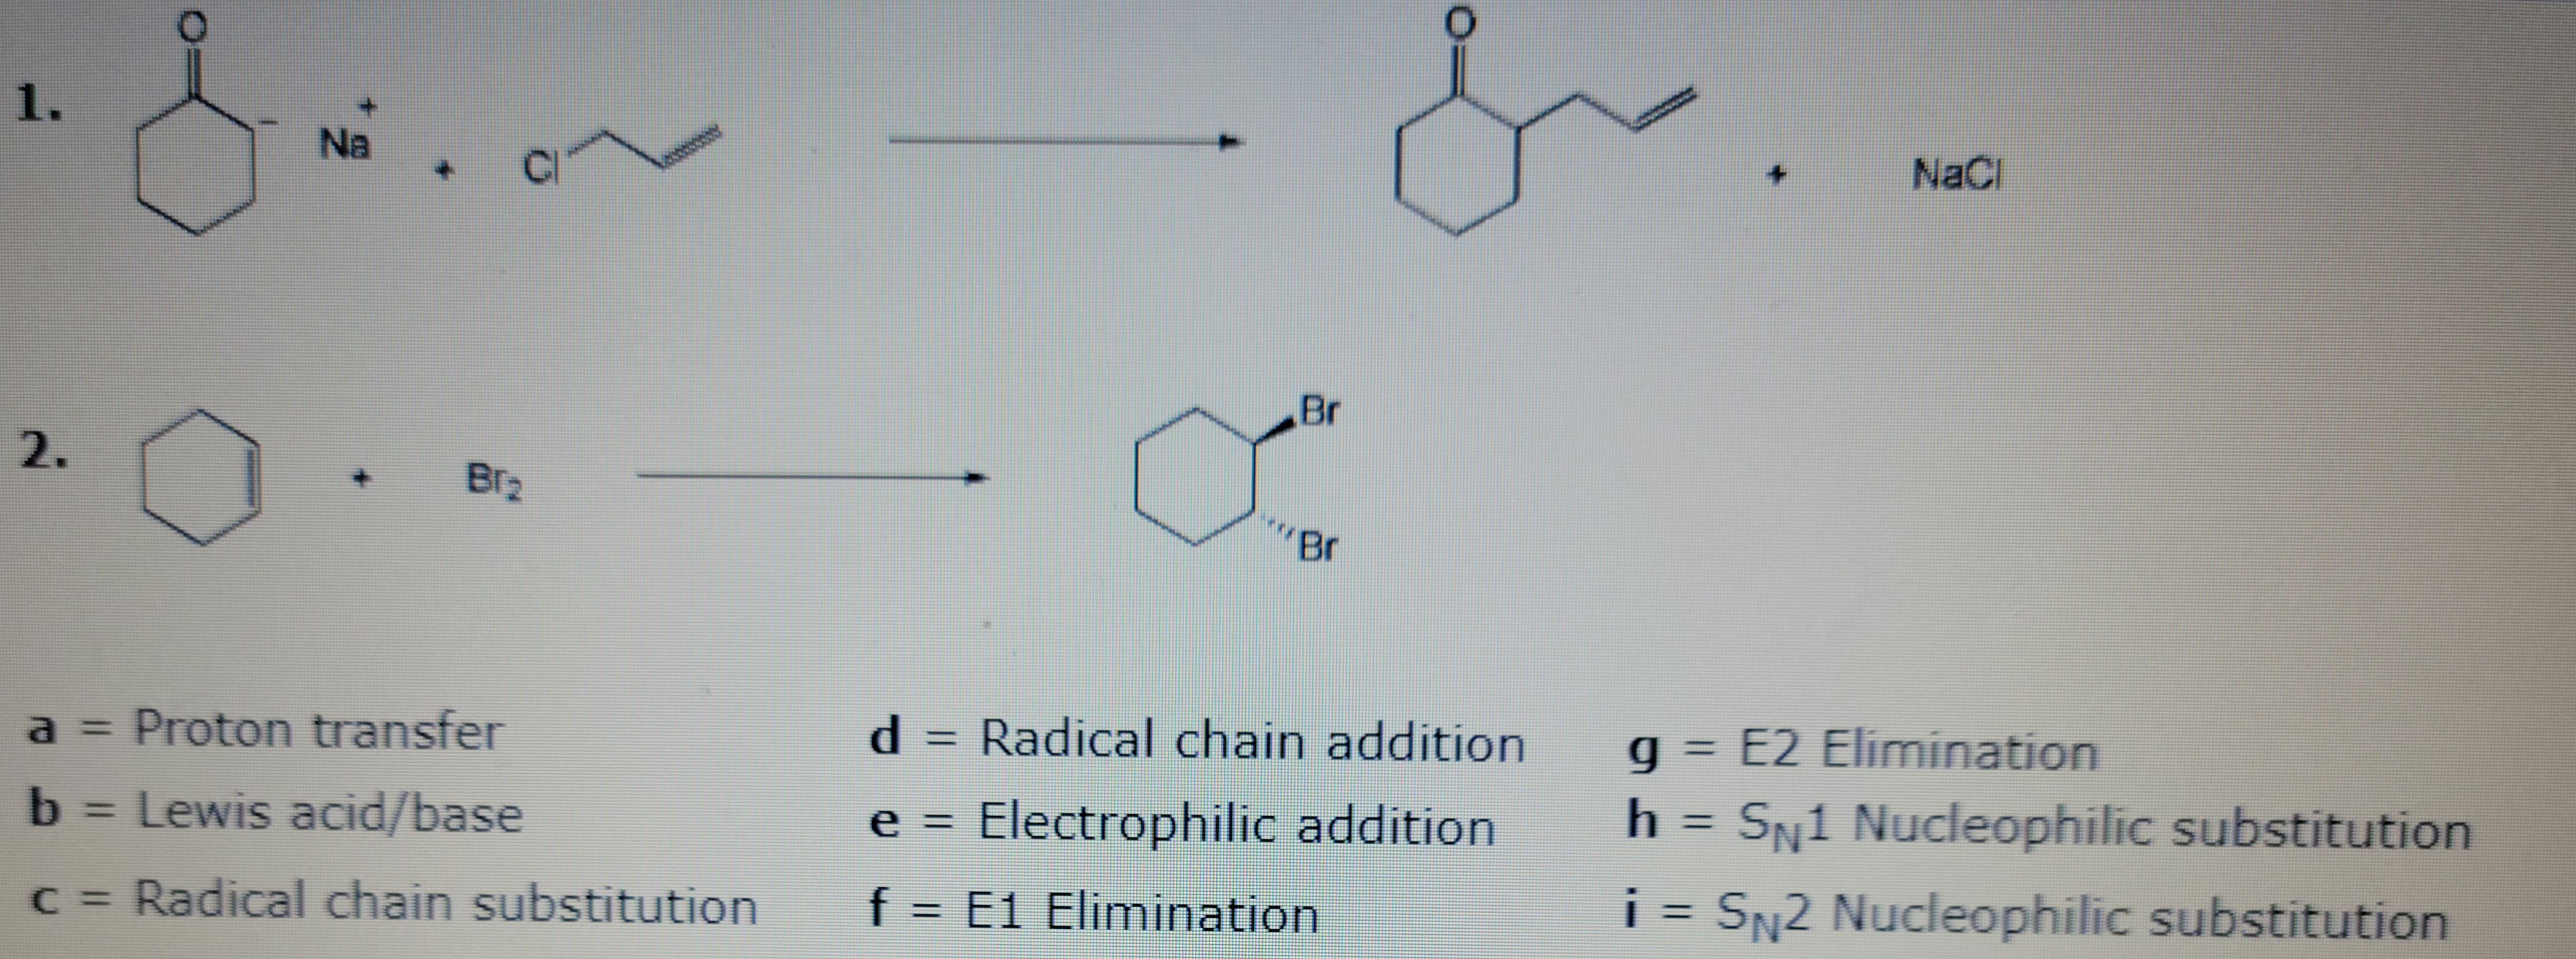 1.
2.
Na
CI
Br₂
a = Proton transfer
b = Lewis acid/base
c = Radical chain substitution
Br
Br
d = Radical chain addition
e = Electrophilic addition
f = E1 Elimination
www
i
g = E2 Elimination
h
=
NaCl
=
SN1 Nucleophilic substitution
SN2 Nucleophilic substitution